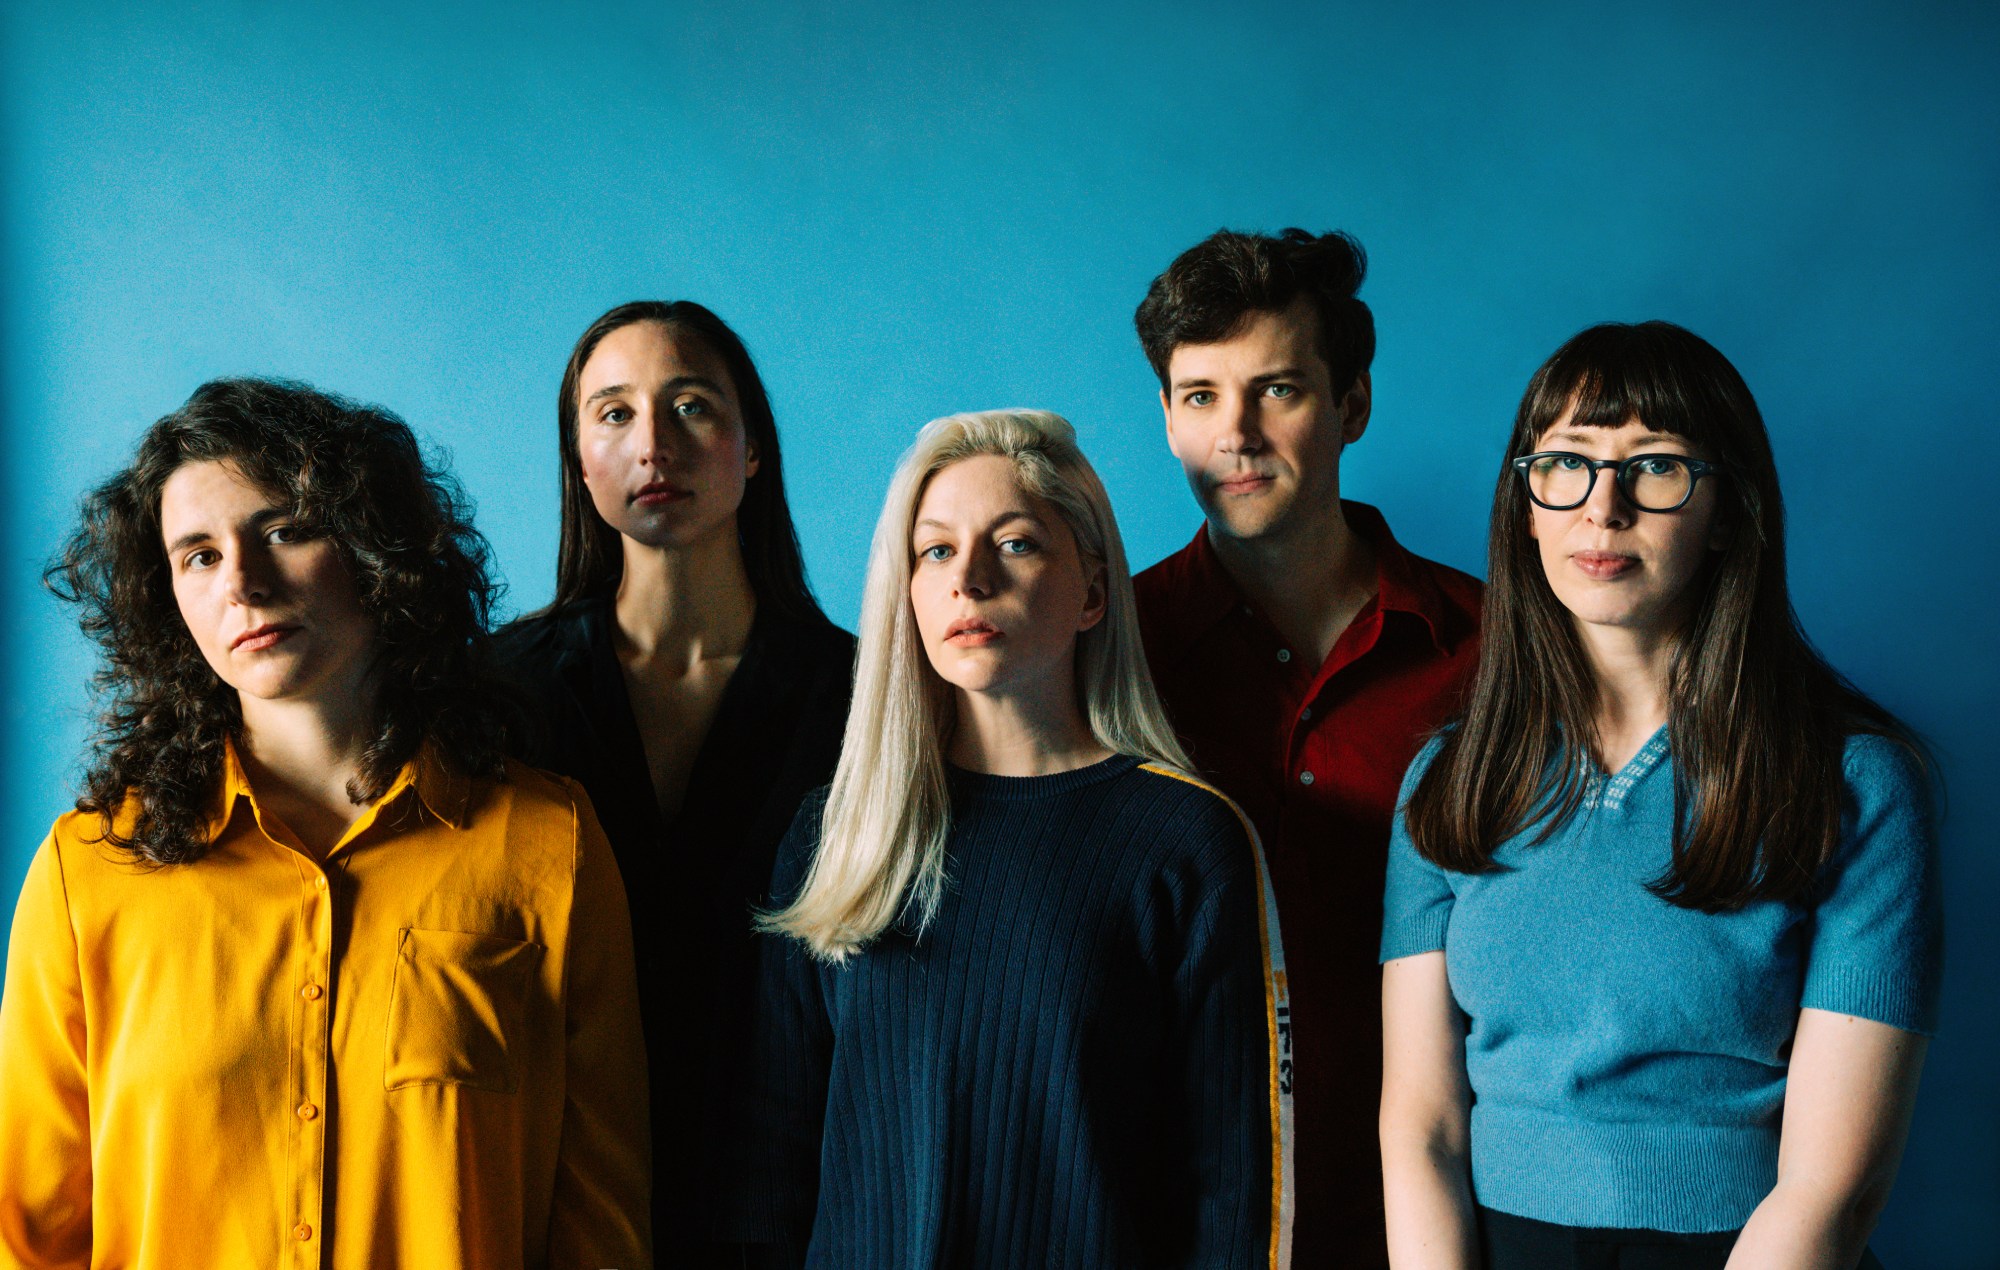 Alvvays: “The only thing I know is to put my head down and keep swinging”